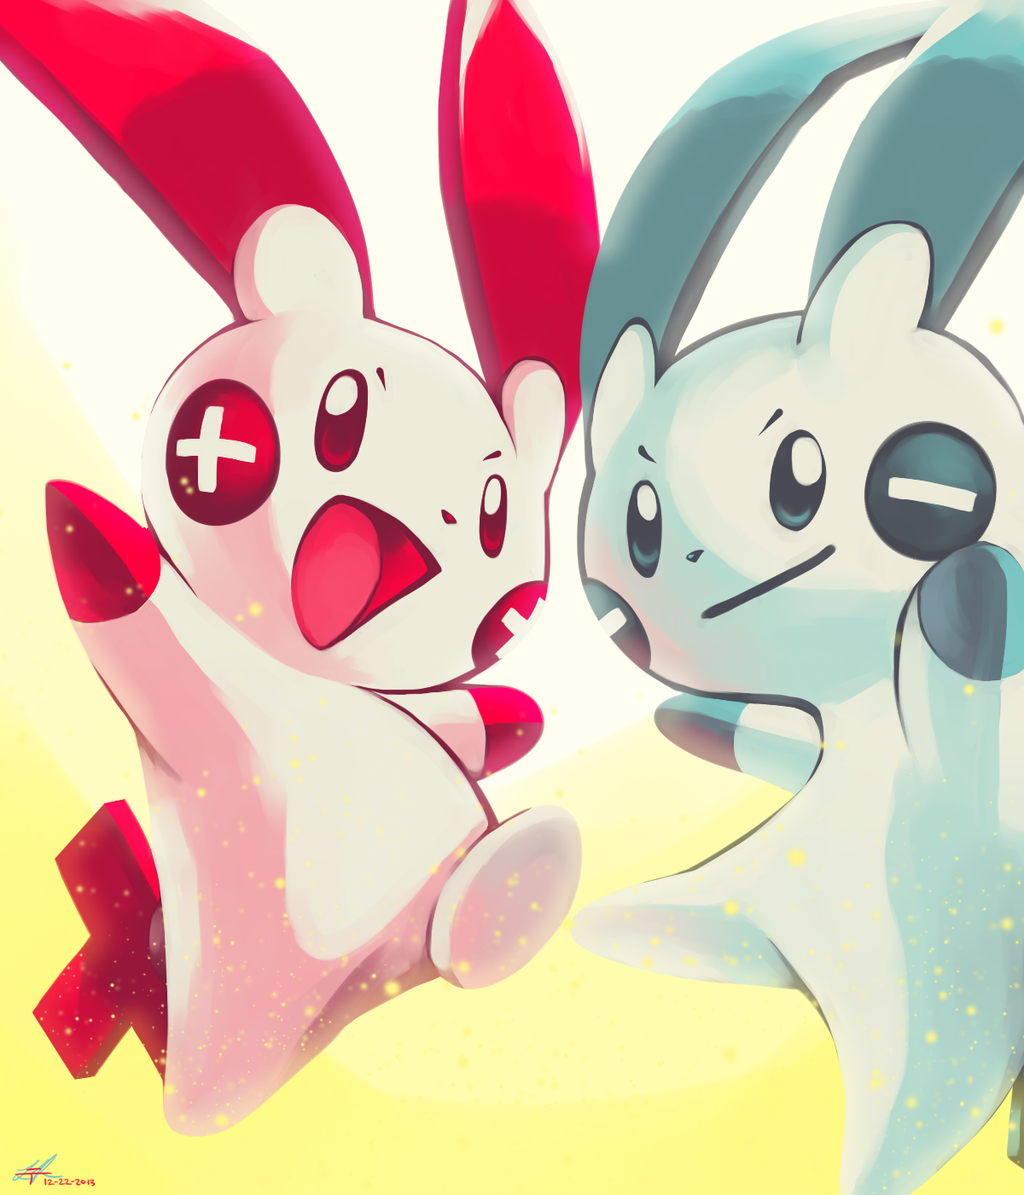 Day20 [ELECTRIC RODENT] Plusle and Minun by Rock-Bomber on DeviantArt